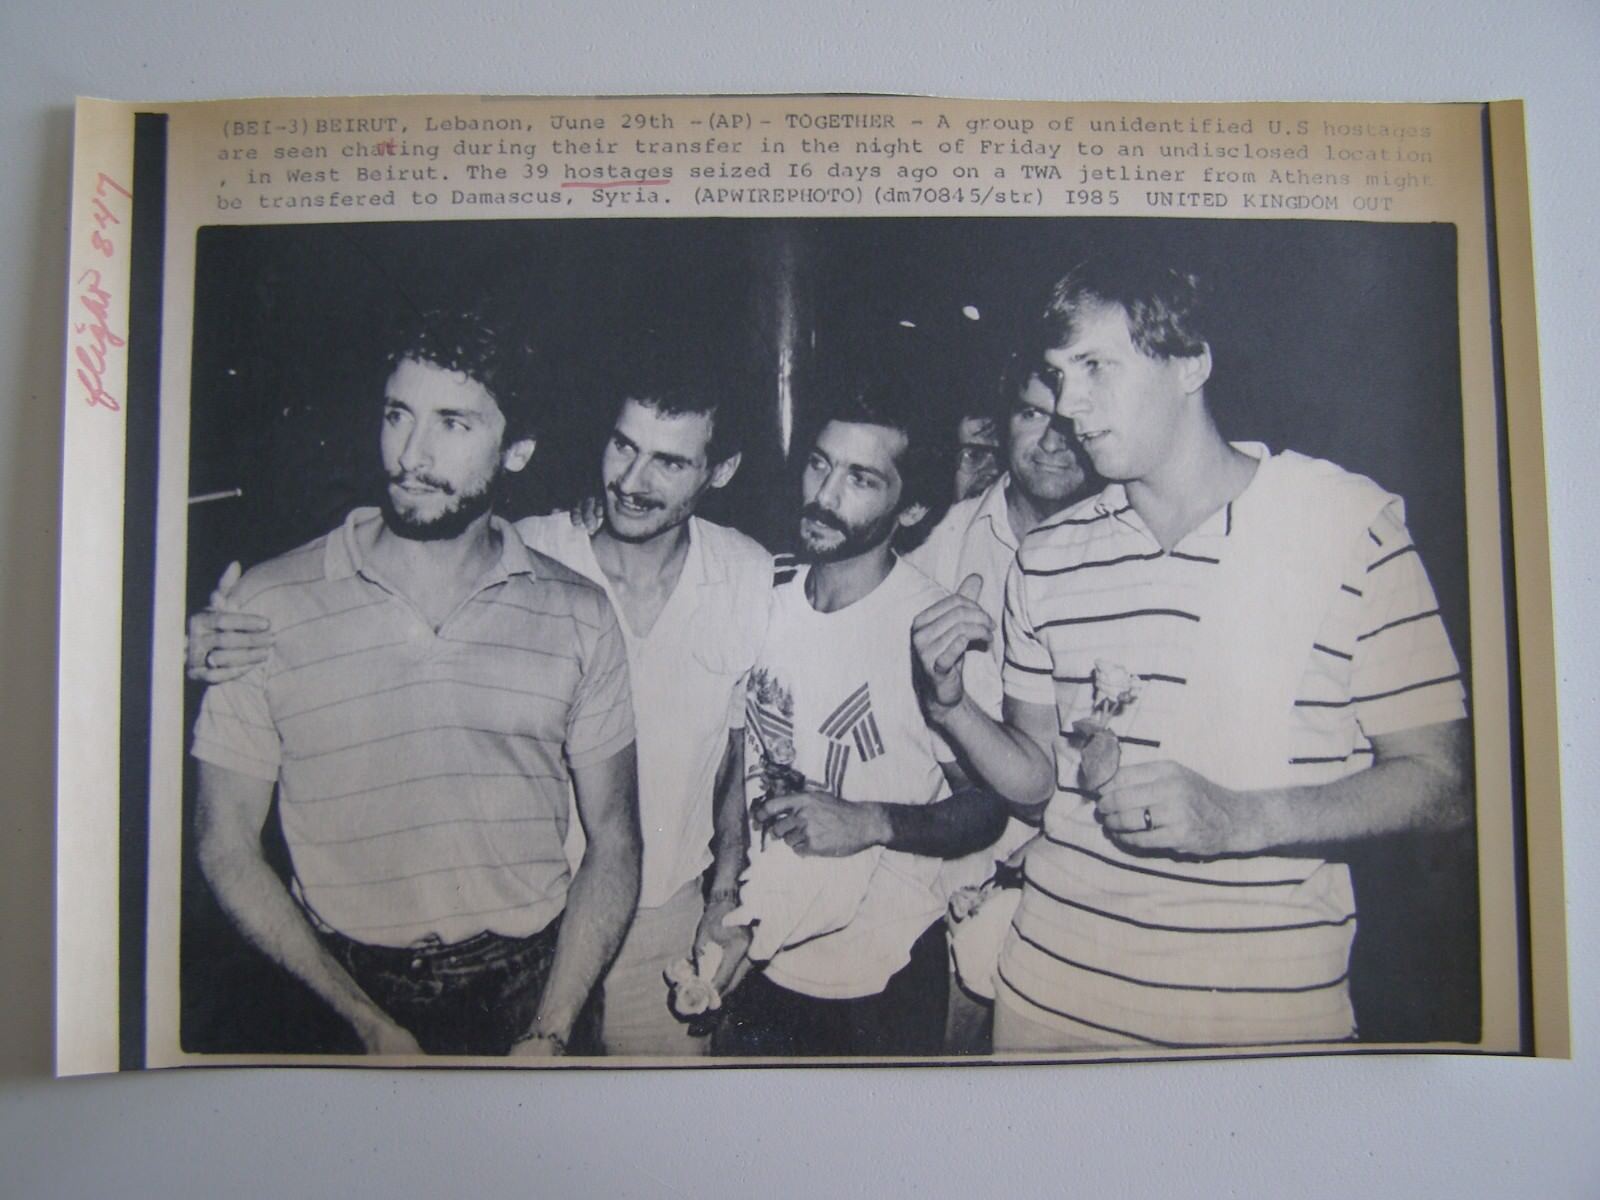 Vtg Wire Press Photo Twa 847 Hijacking 6/85 Group Of Unidentified Hostages Talk